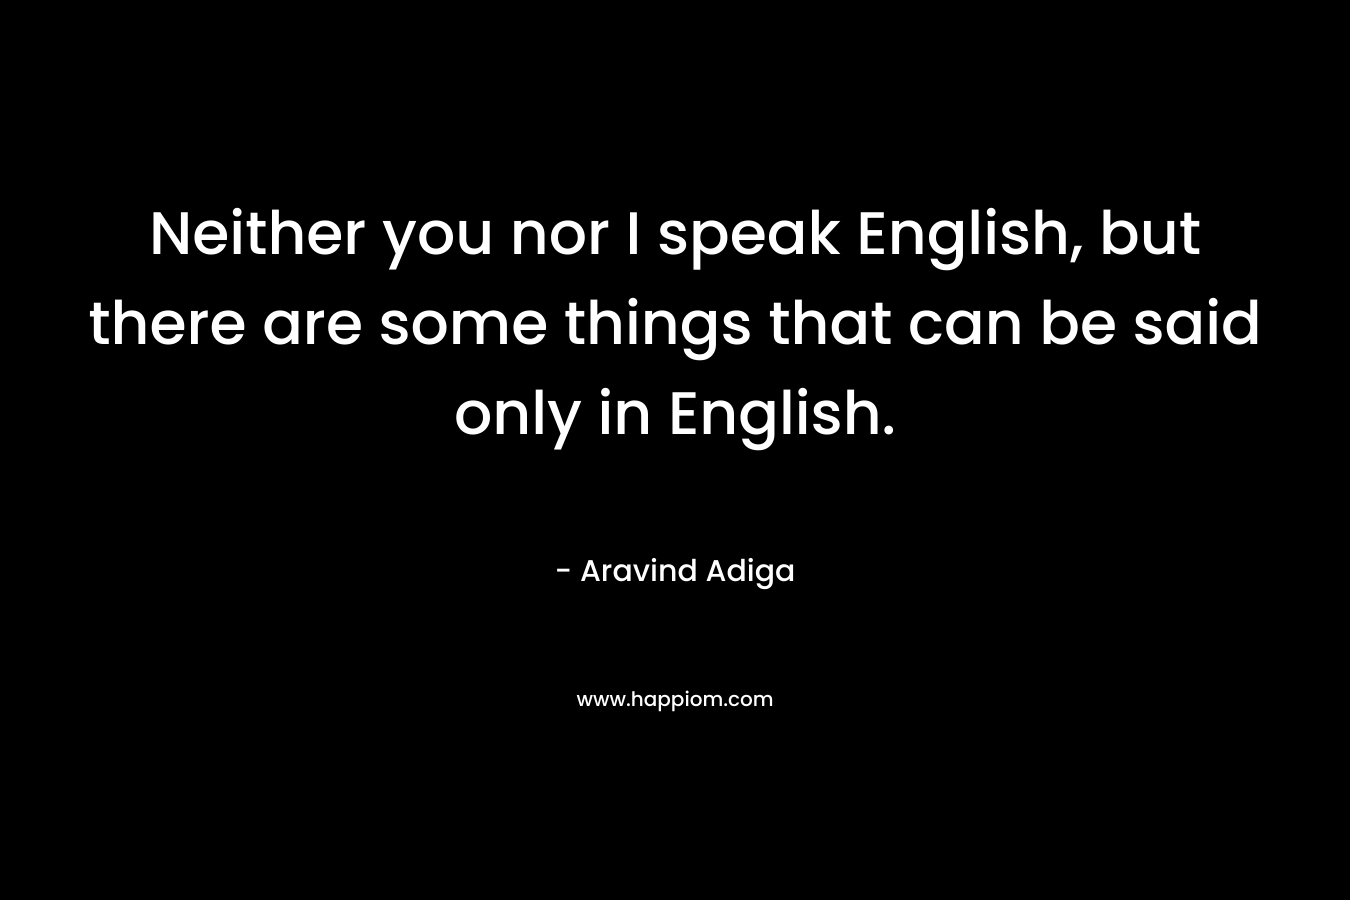 Neither you nor I speak English, but there are some things that can be said only in English. – Aravind Adiga